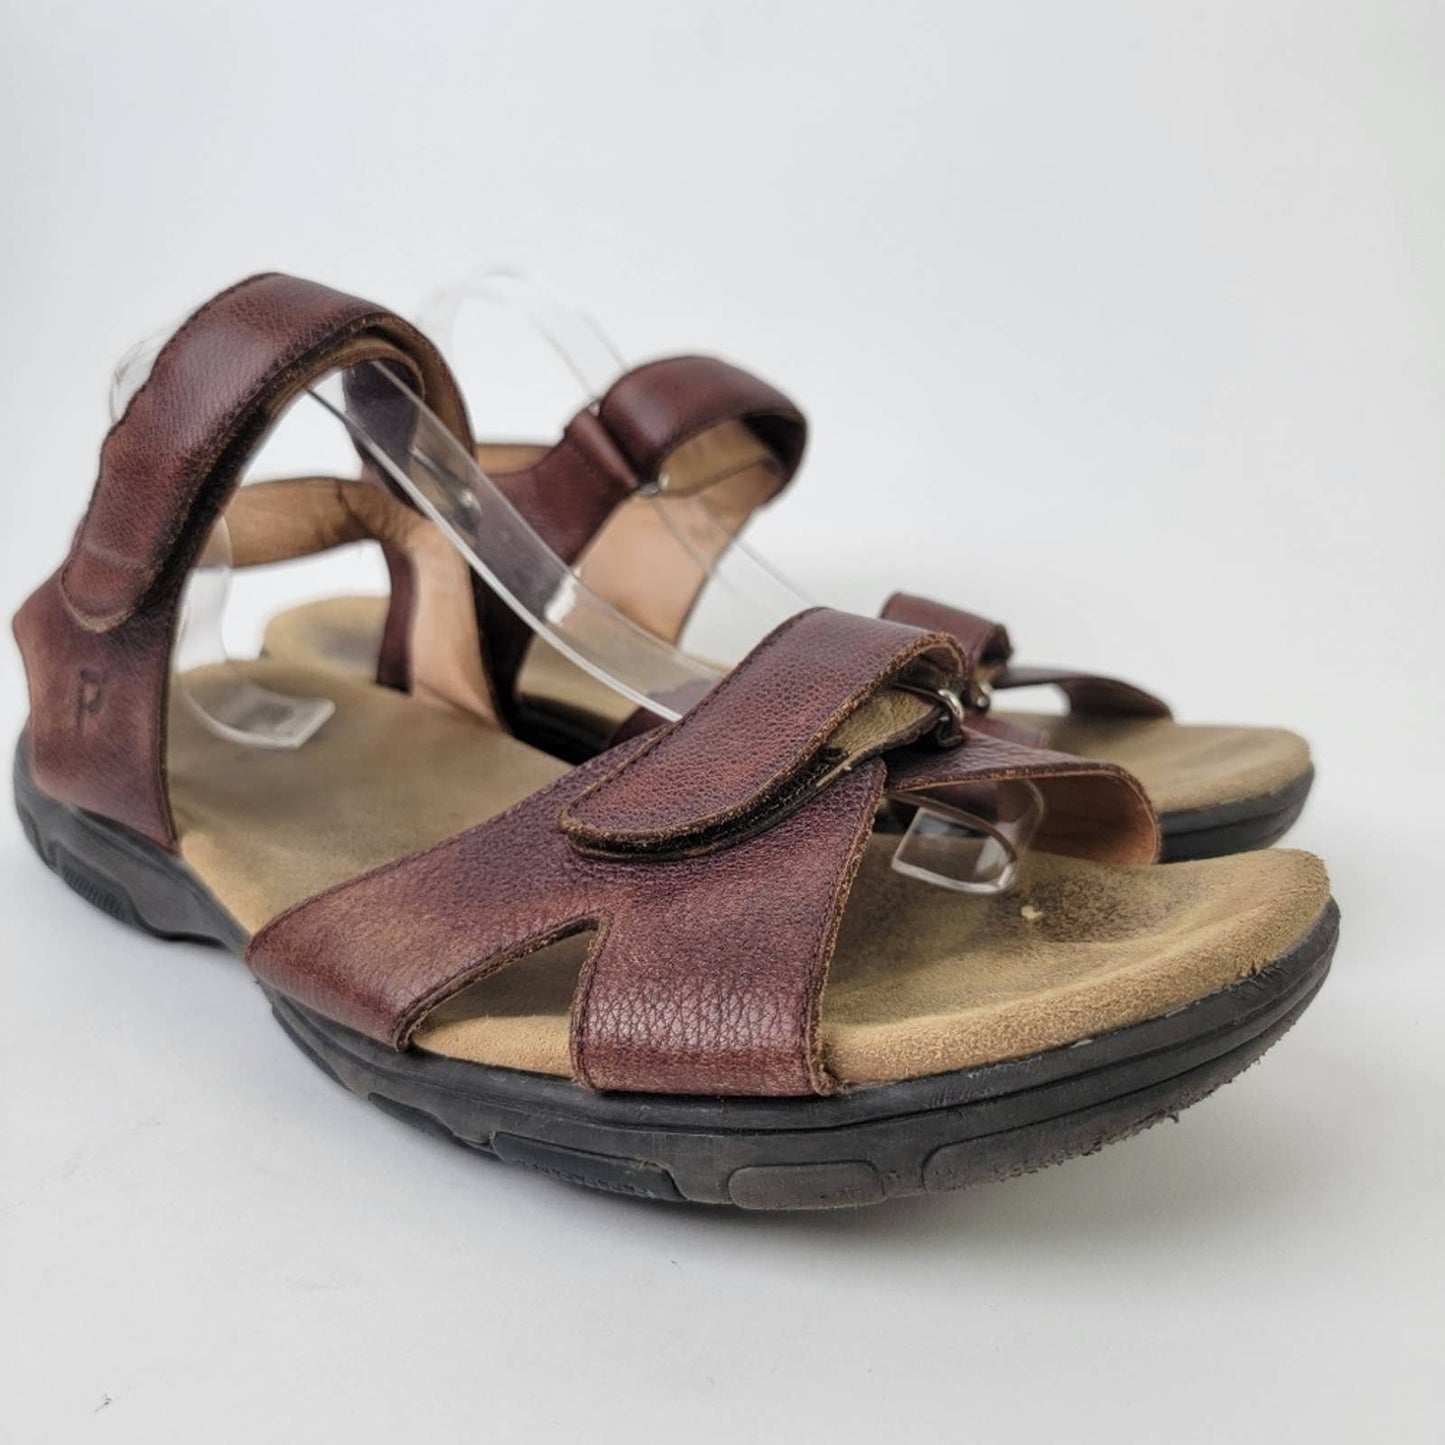 Propet Bown Leather Fisherman Sandals - 15